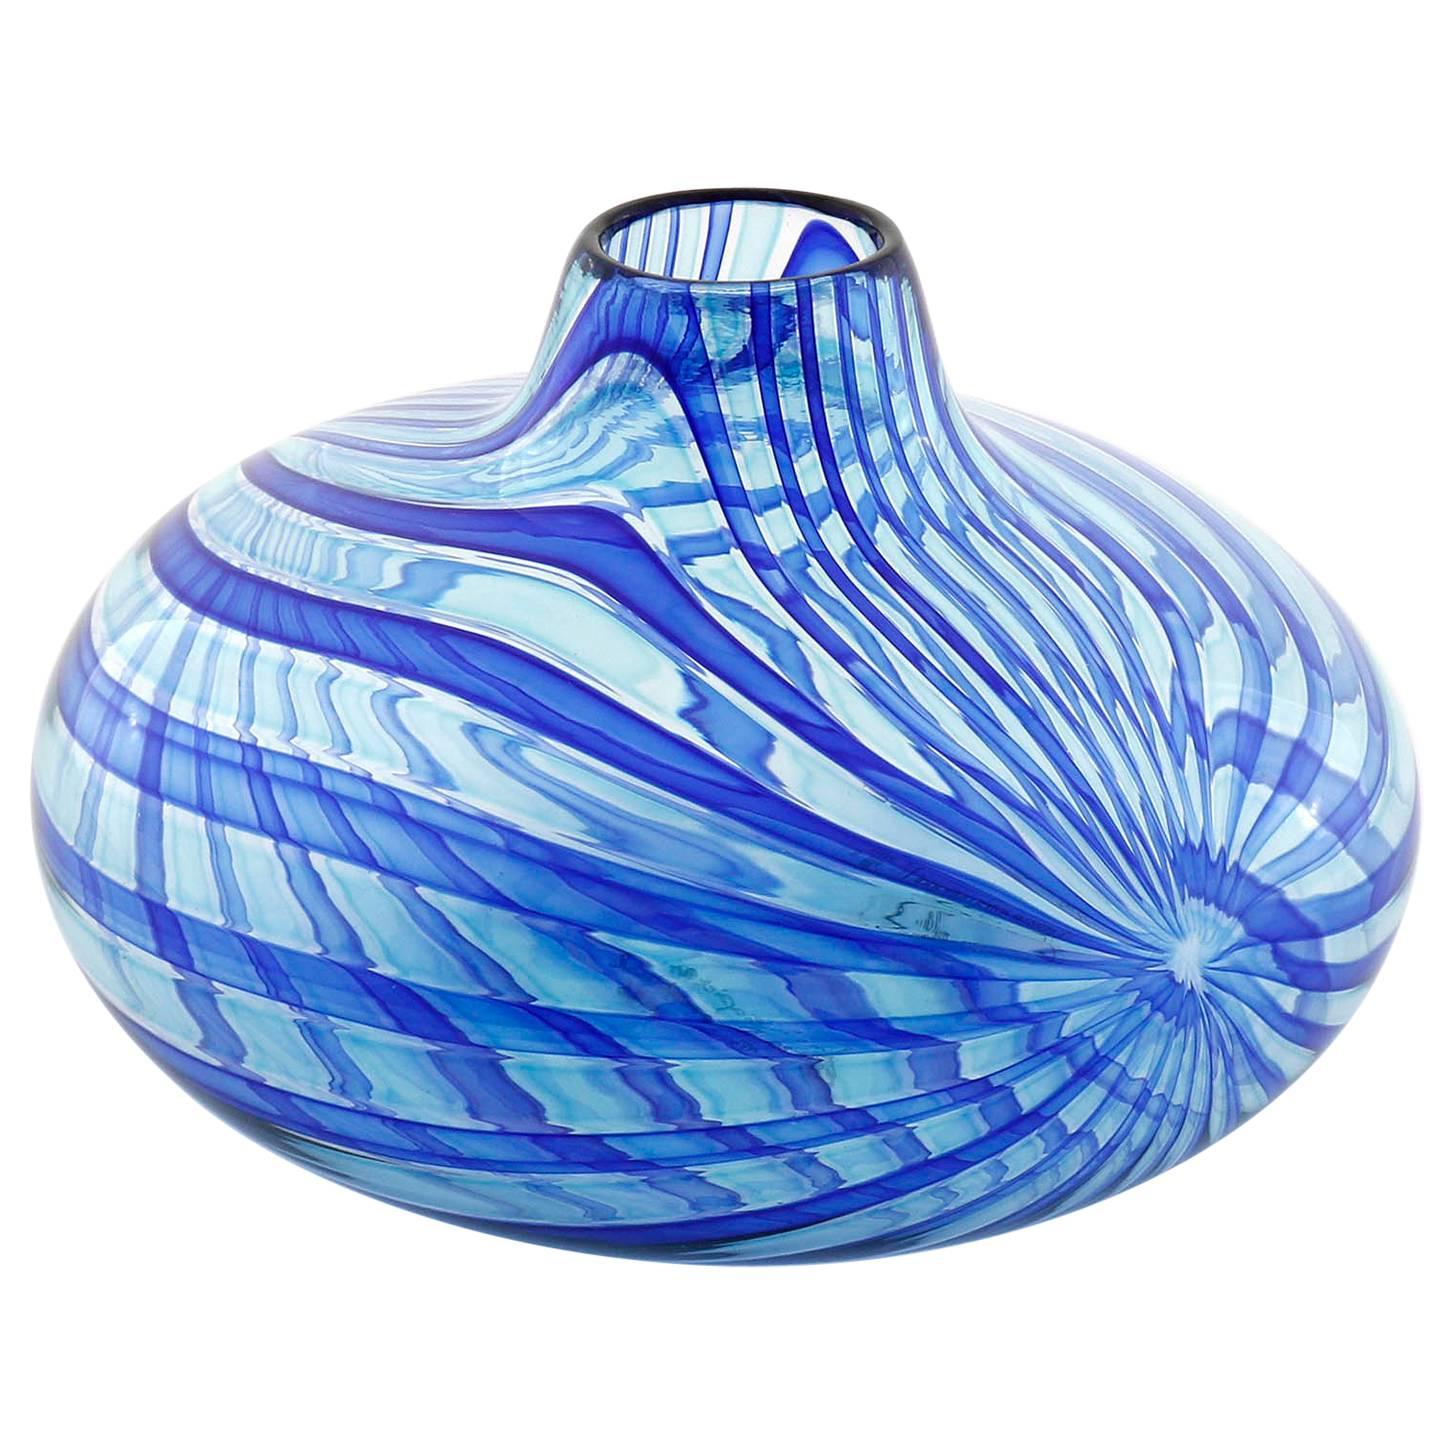 A beautiful and rare Italian glass vase 'Samarcanda' by Lino Tagliapietra for Effetre International, Murano, 1986.

Lino Tagliapietra is an influential Italian glass artist and master glassmaker who is recognized for his skills and talents